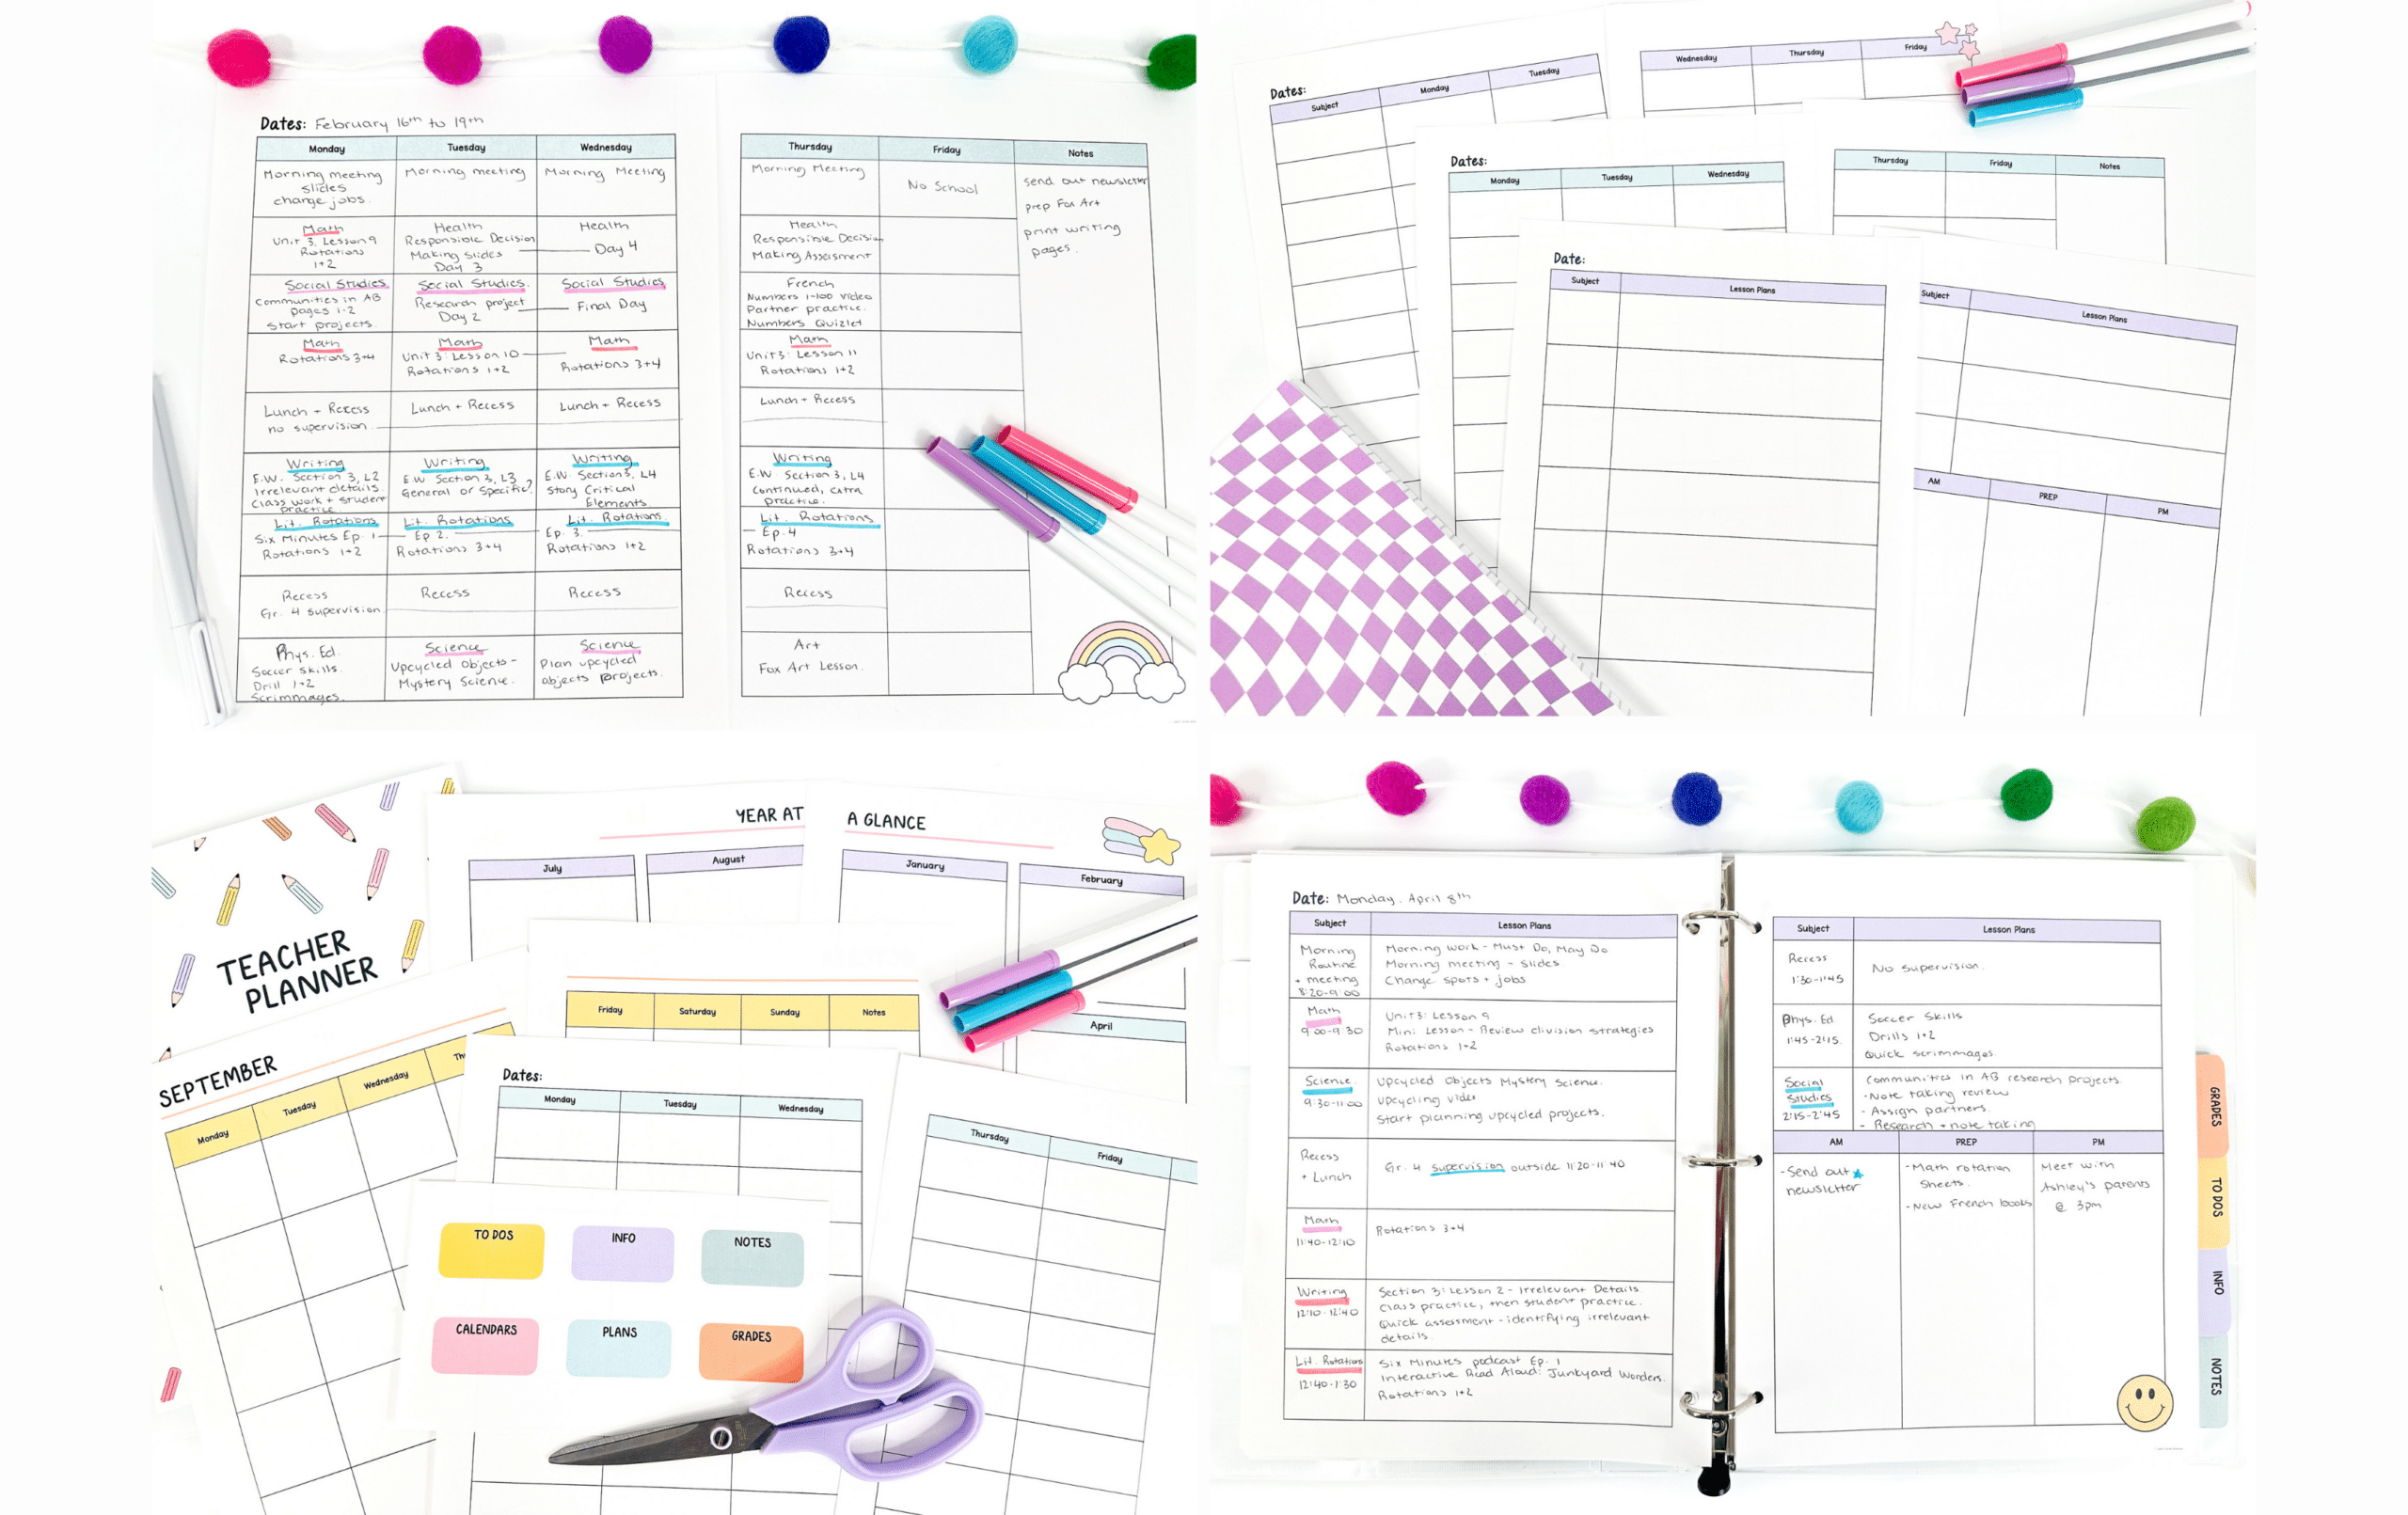 Four photos for a graphic showing the printable teacher planner including simple teacher plans on the weekly planner spread and the daily lesson planning template